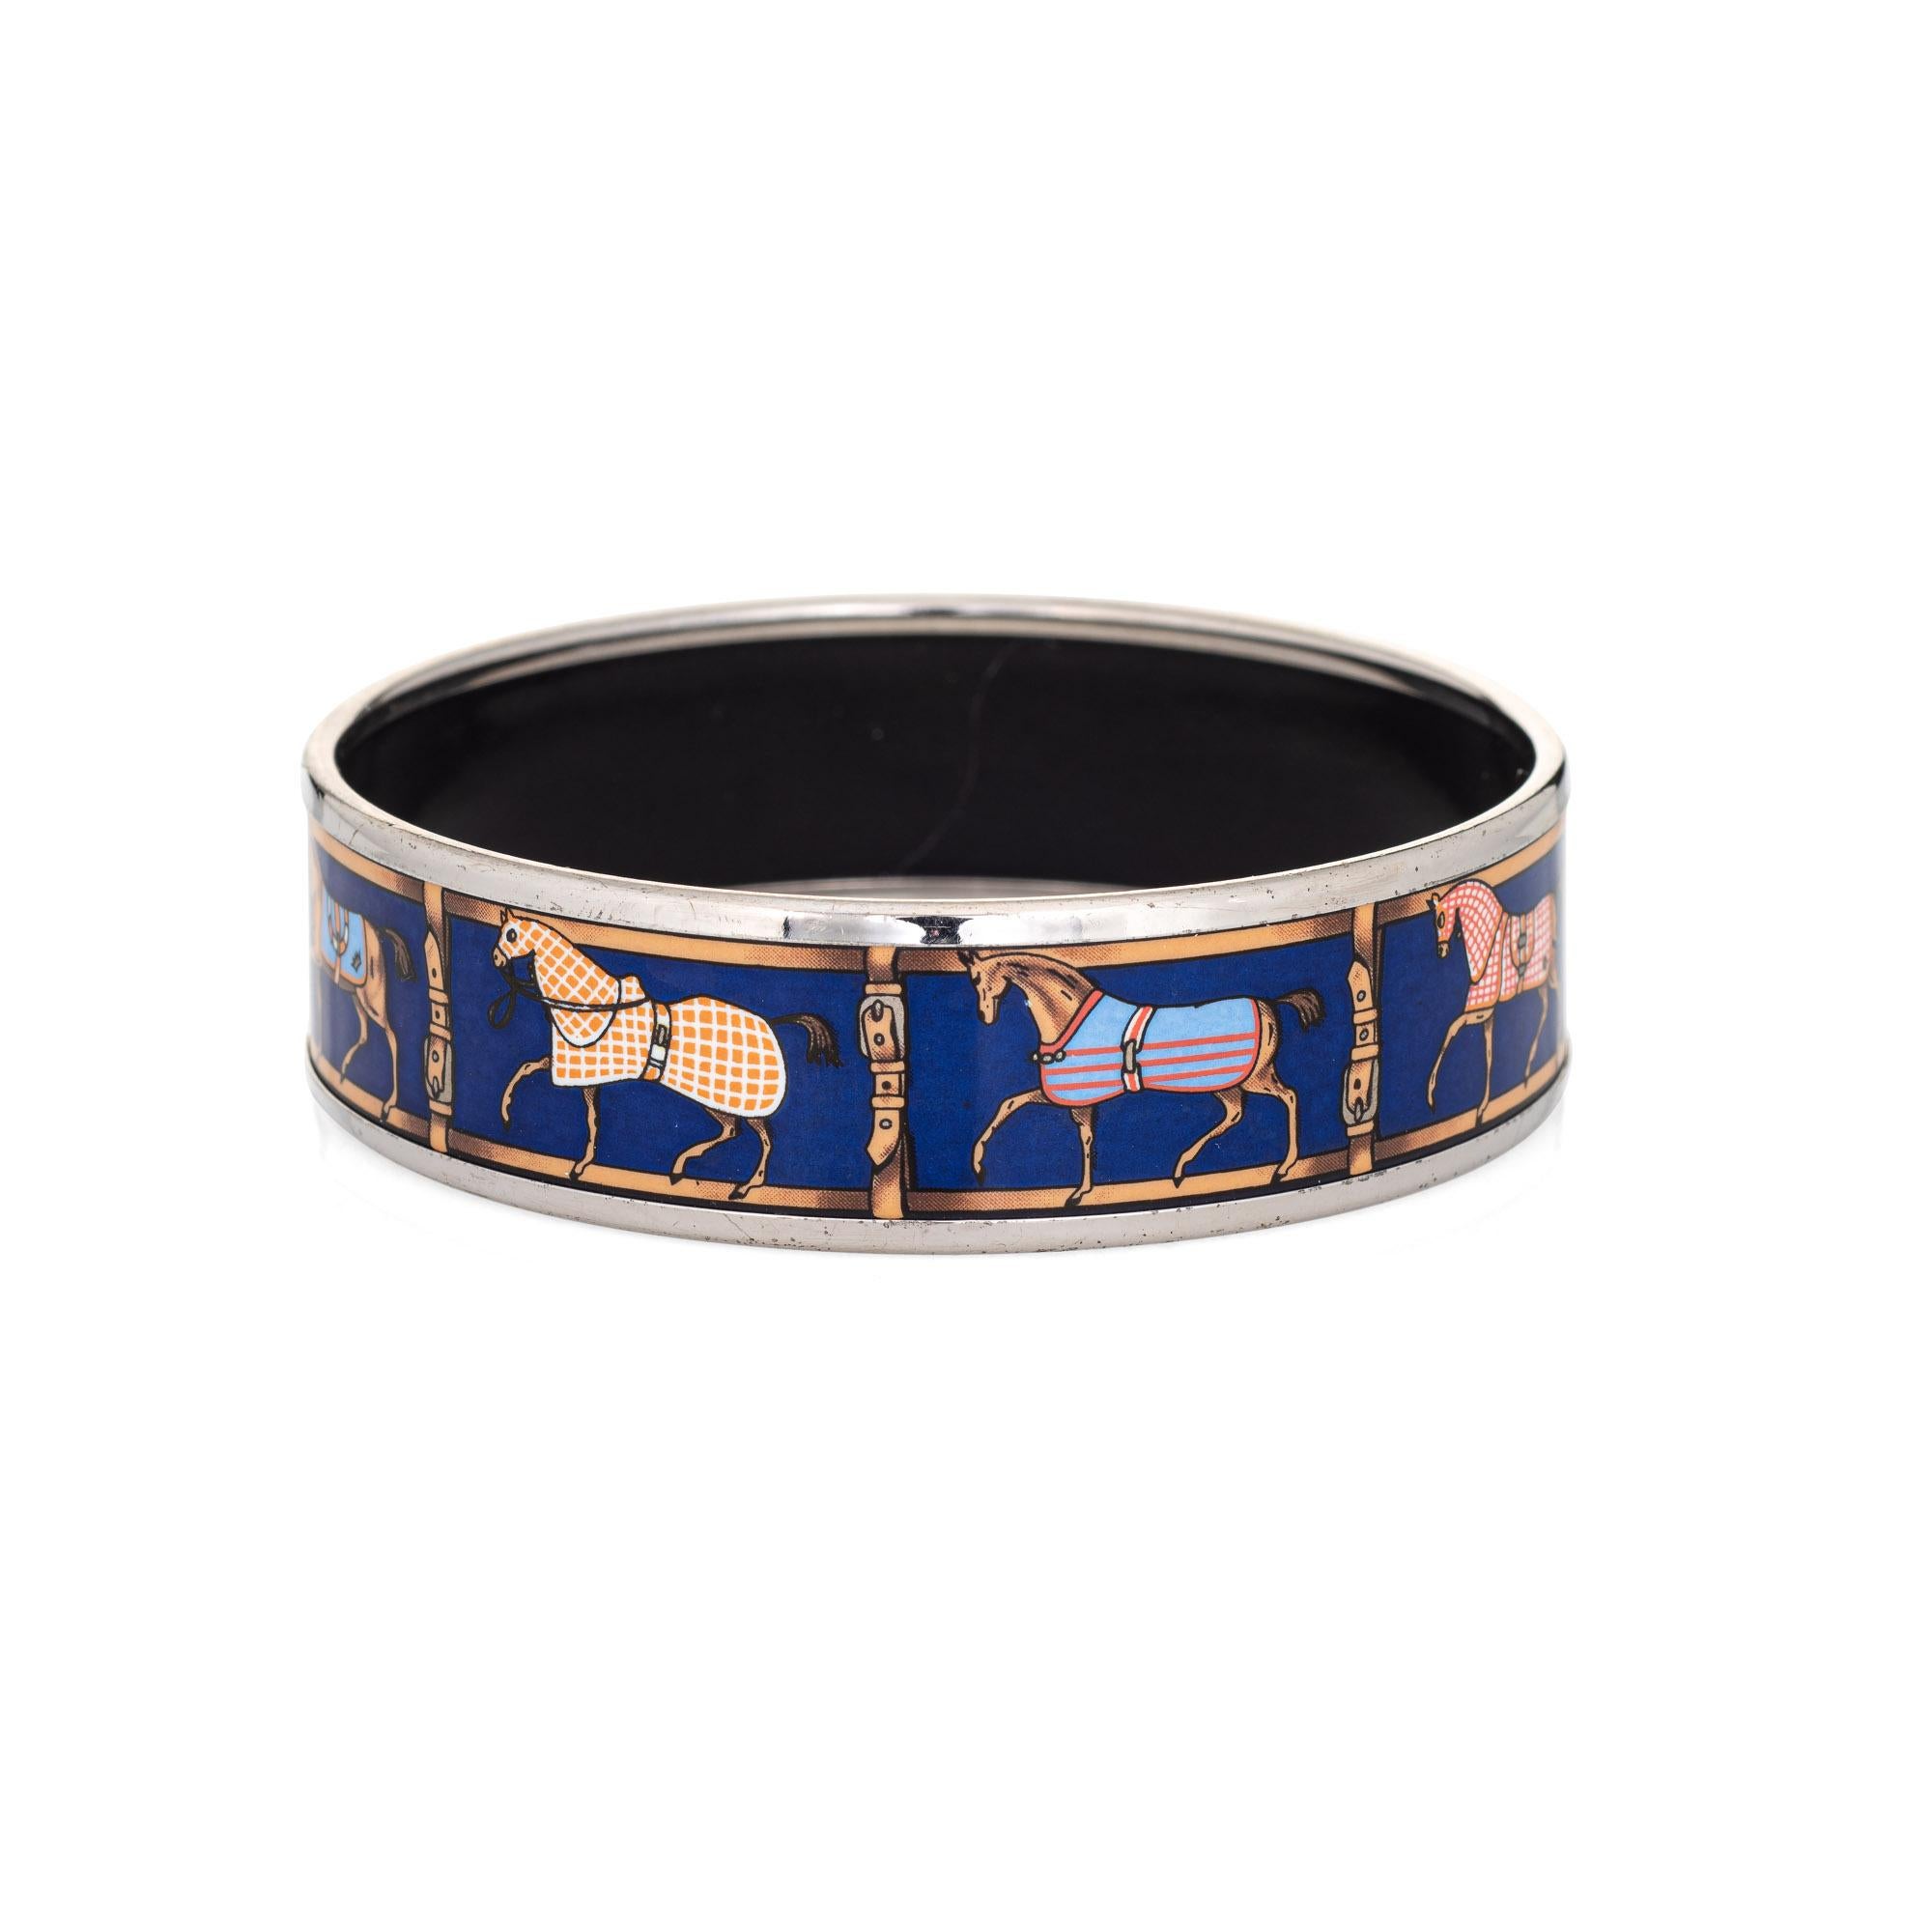 Overview:

Pre-owned vintage Hermes enamel bracelet with a prancing Horse pattern set against a royal blue backdrop, with palladium plated hardware. The horses feature decorative blankets. 

The wide 0.70